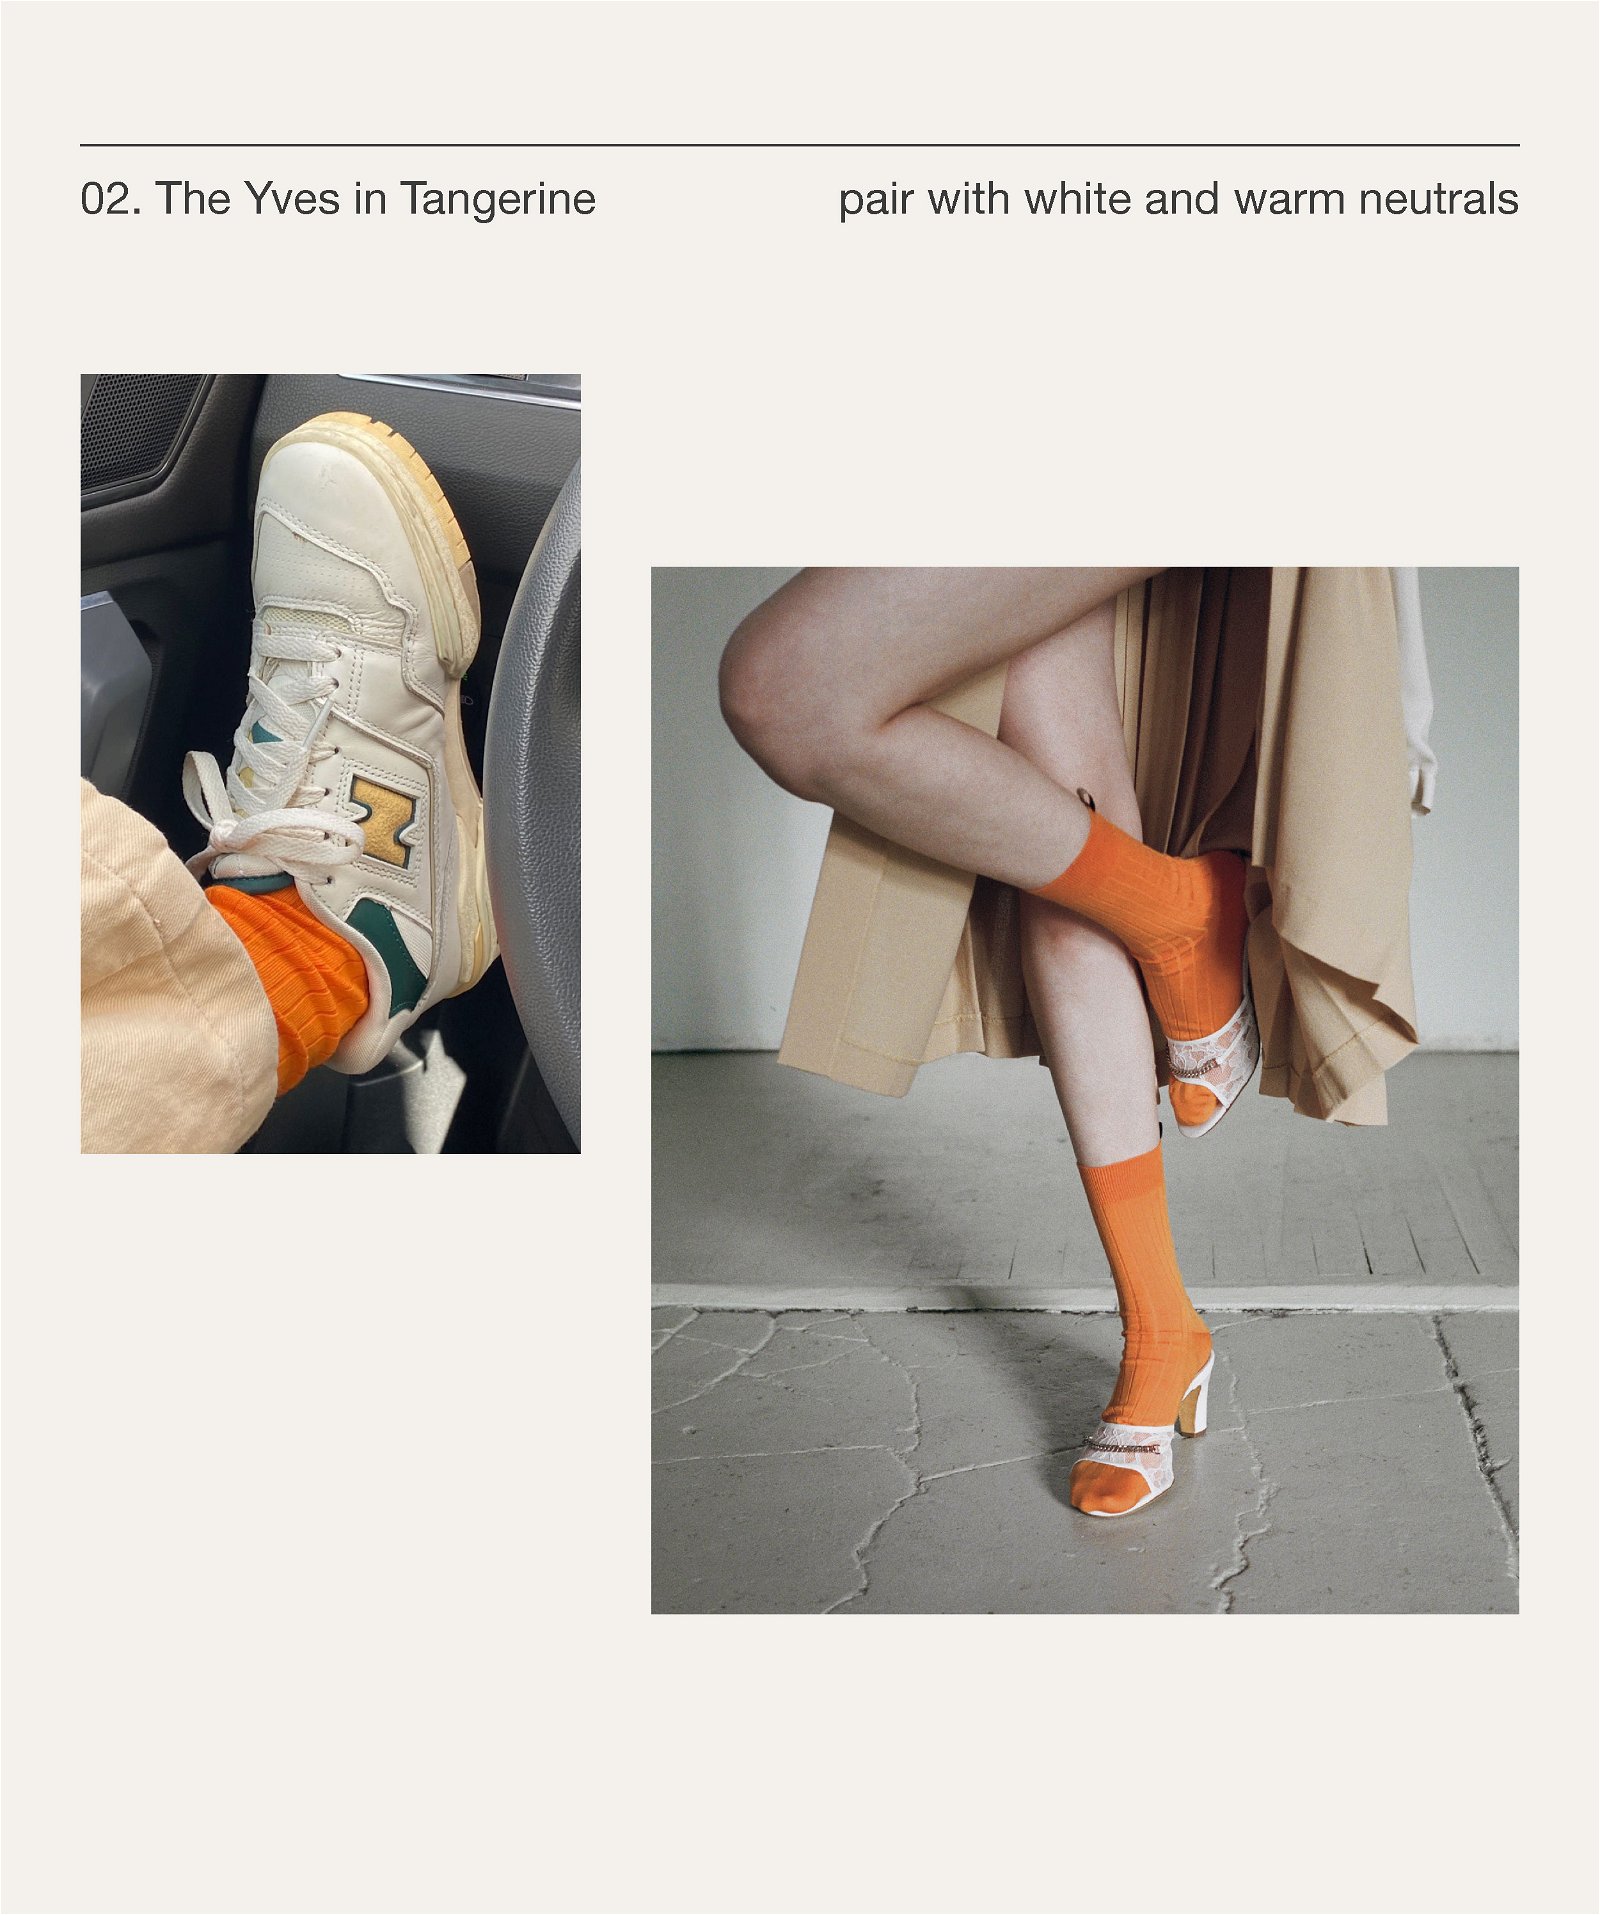 02. The Yves in Tangerine. Pair with white and warm neutrals